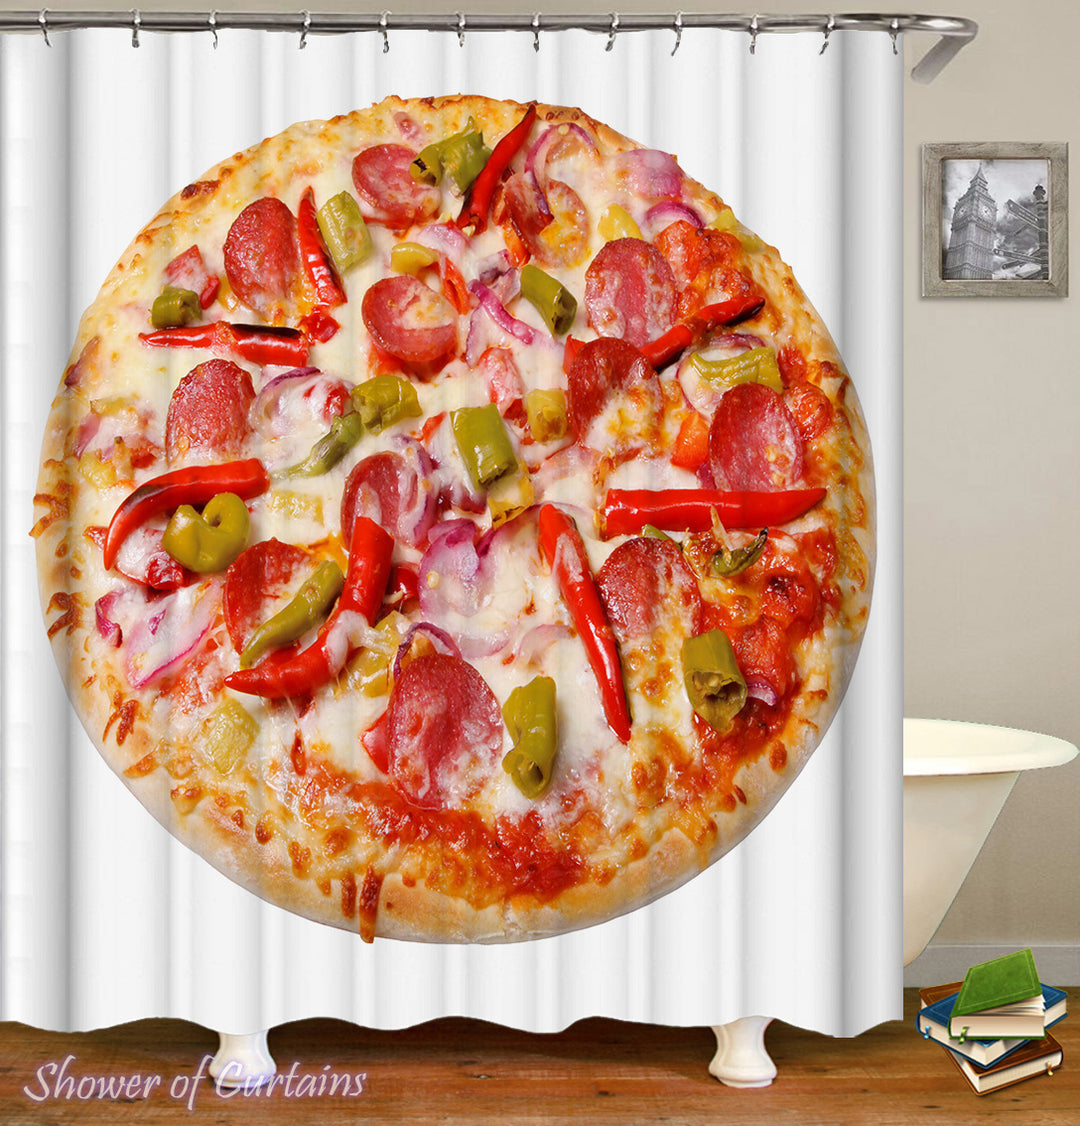 Cool Shower Curtains - Spicy Pepperoni Pizza Shower Curtain